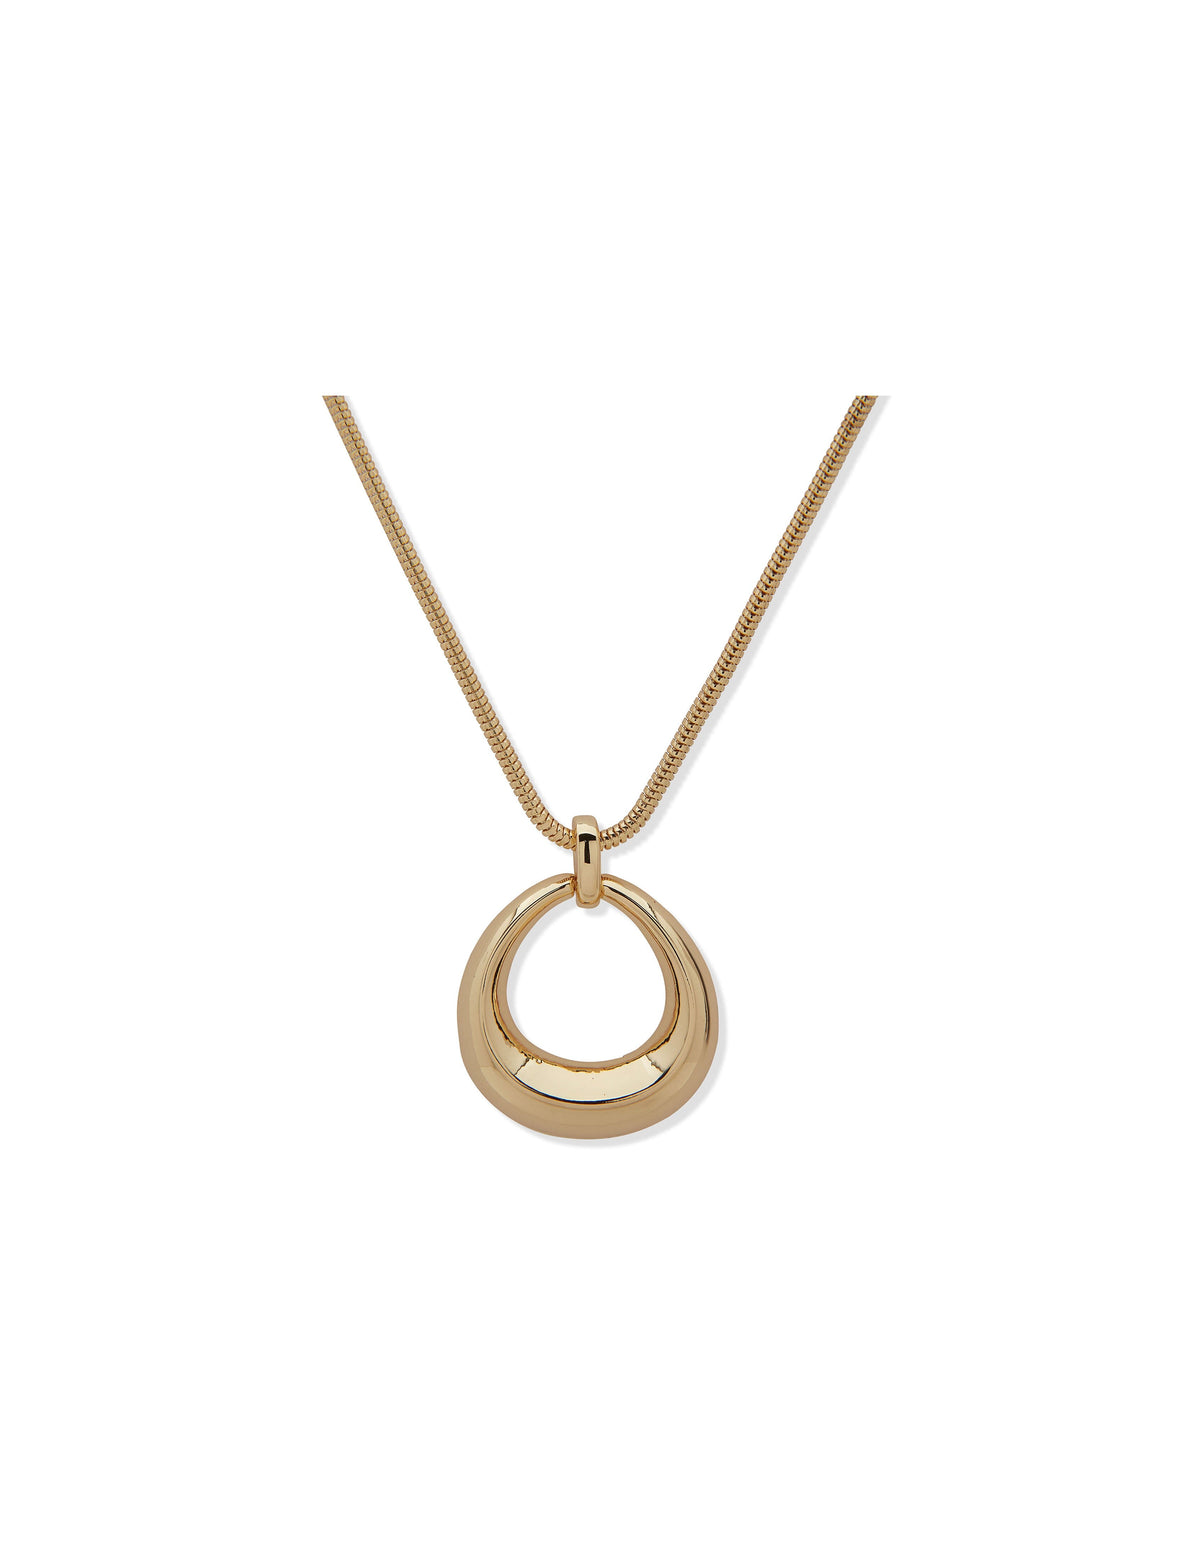 Anne Klein Gold Tone Open Oval Pendant Necklace